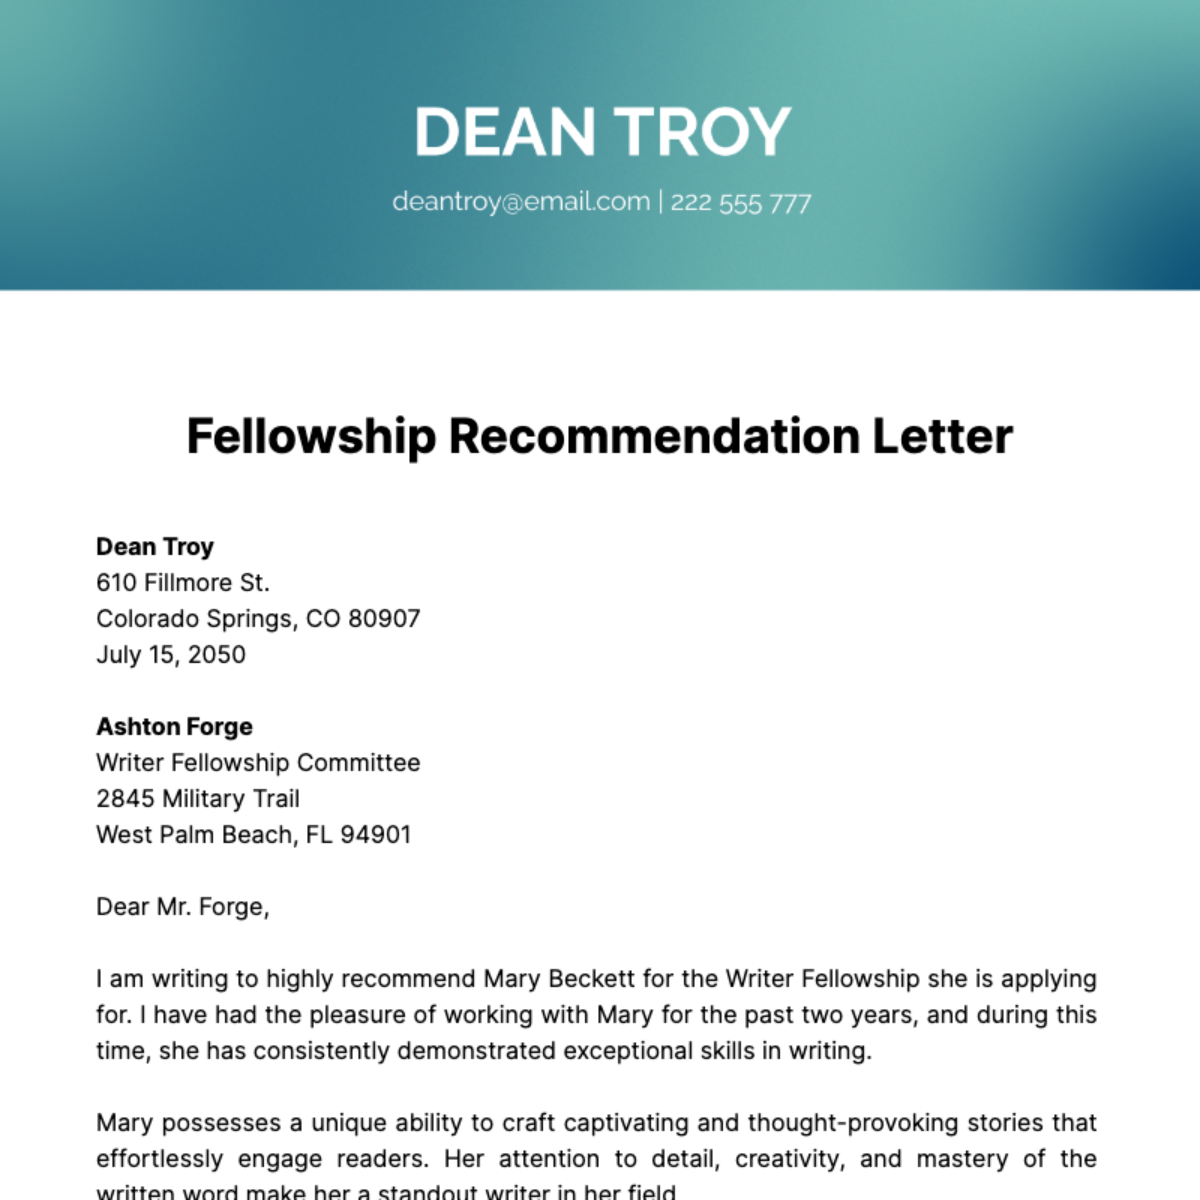 Fellowship Recommendation Letter   Template